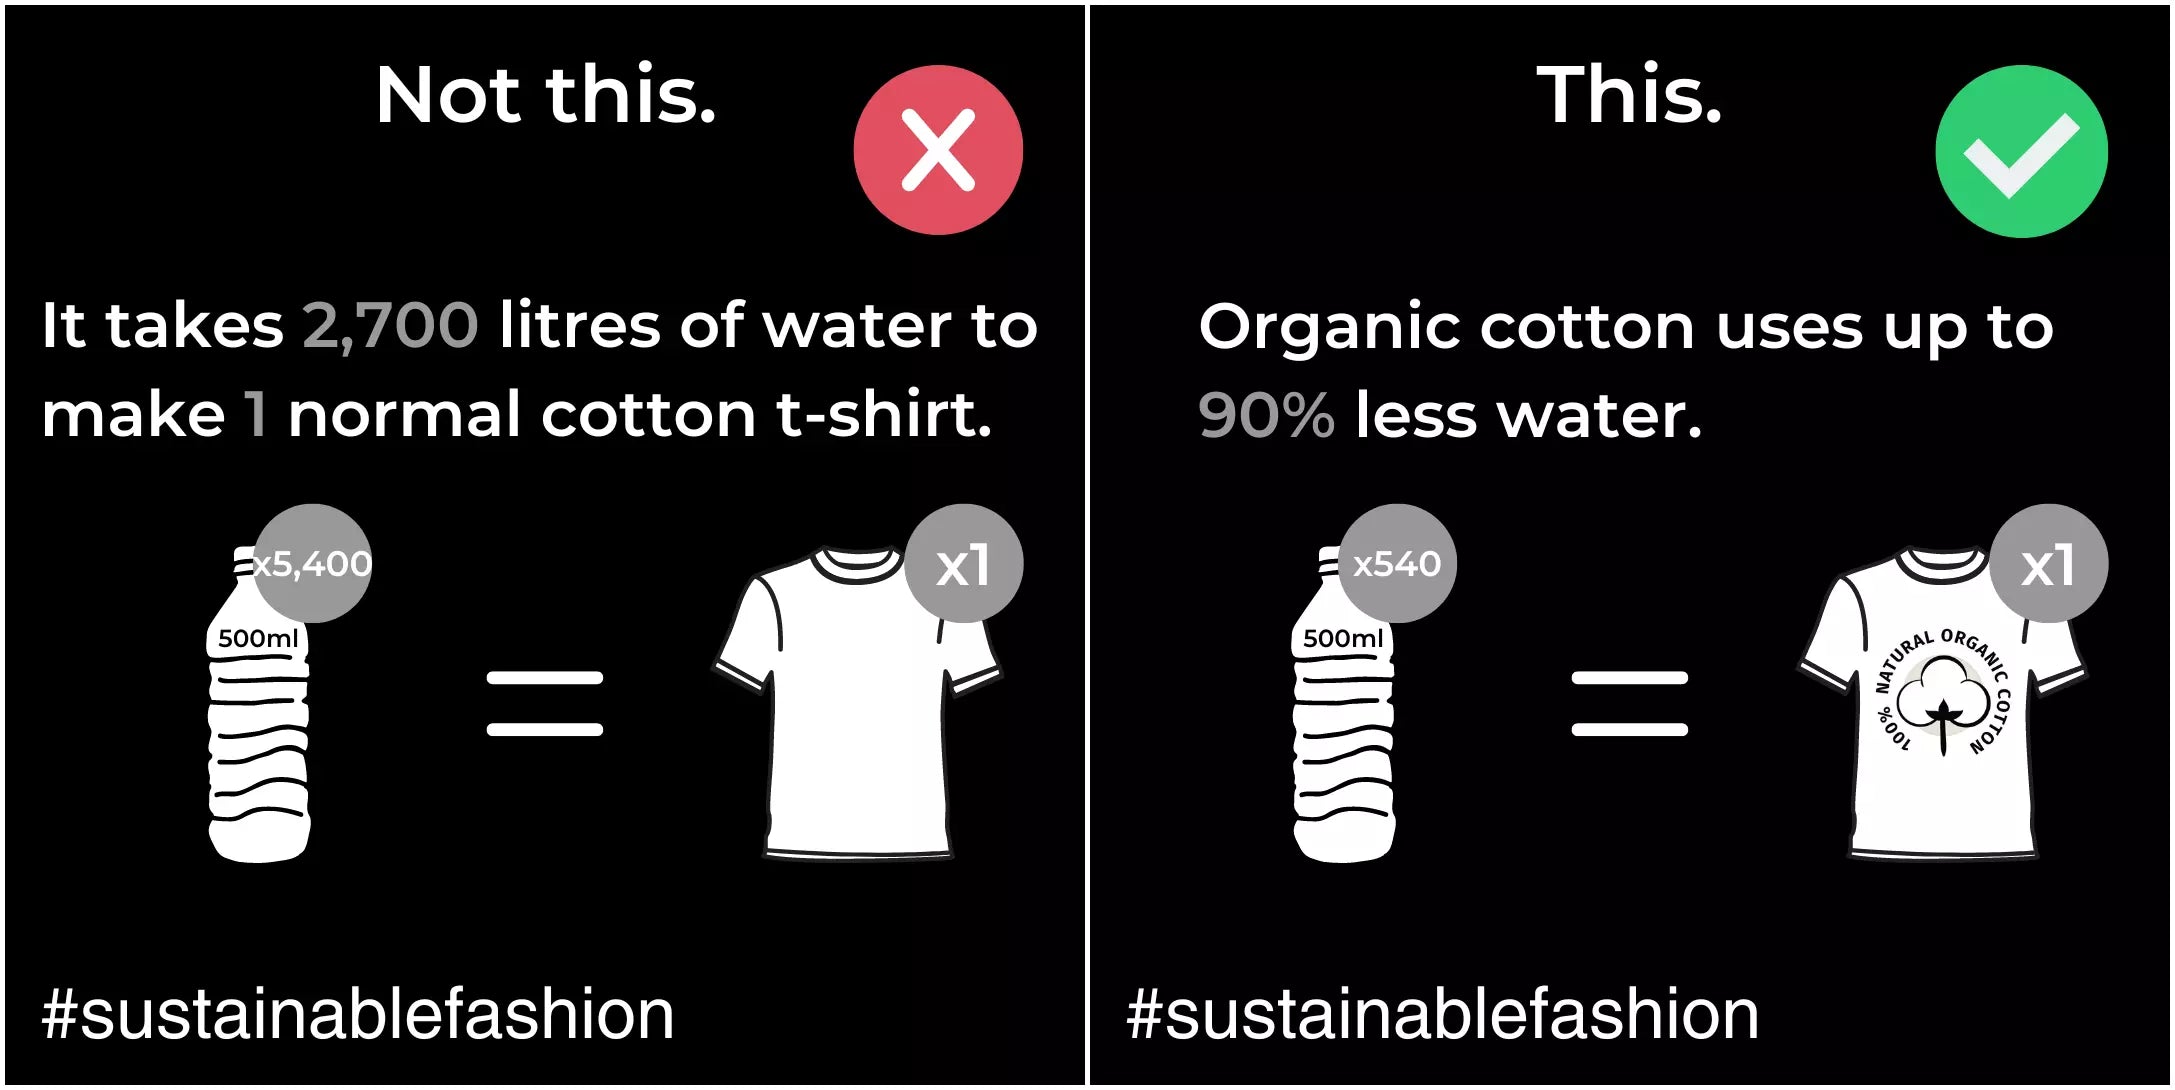 Organic cotton uses up to 90% less water than normal cotton.